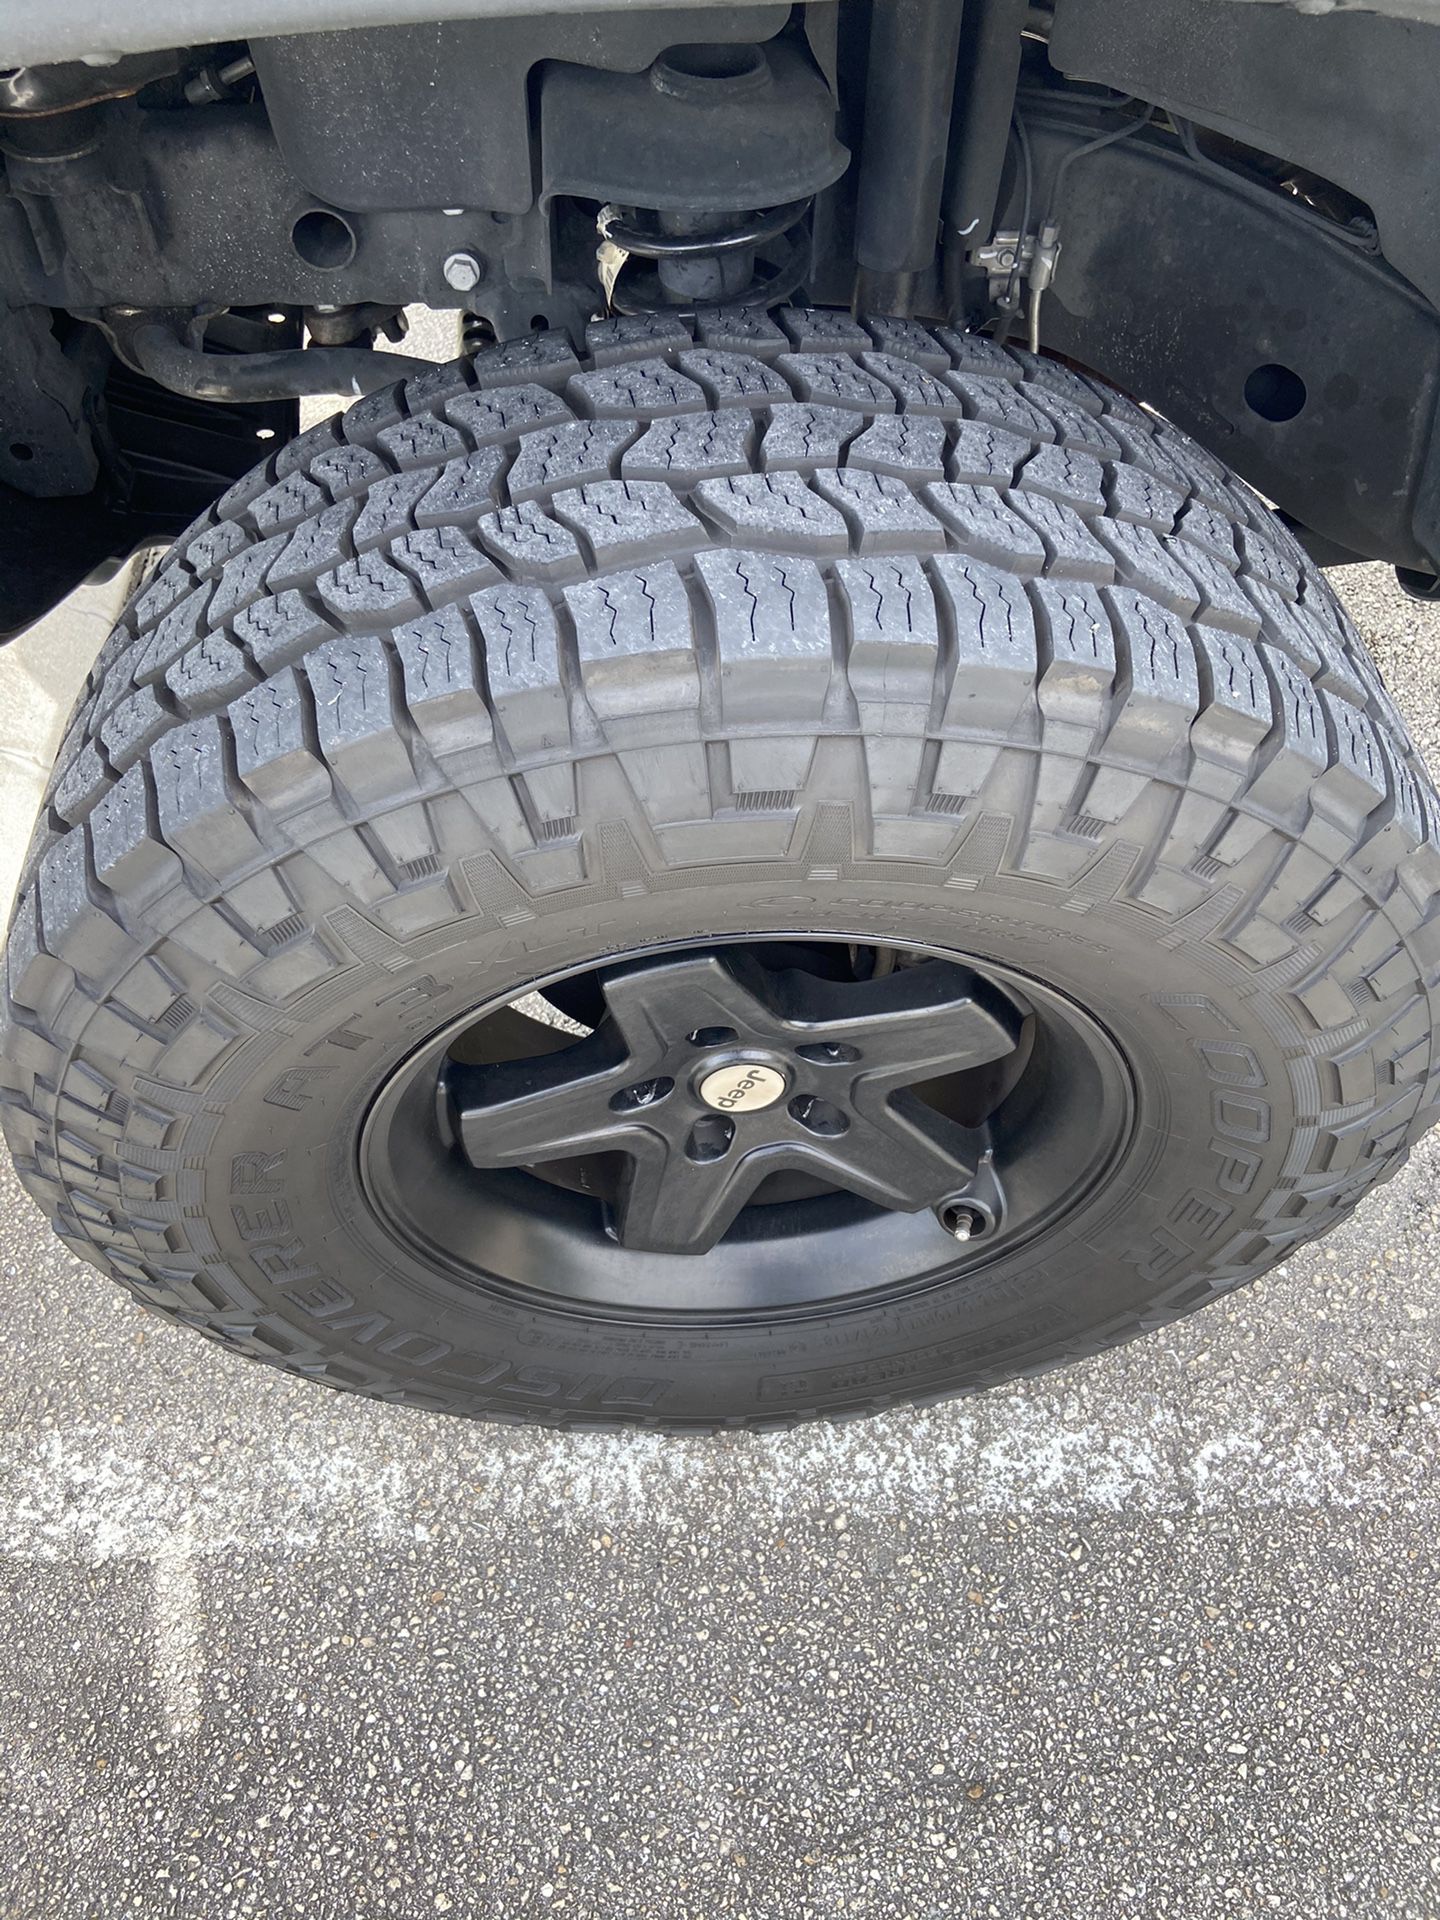 Jeep Wrangler wheels with tires 5x5 rims